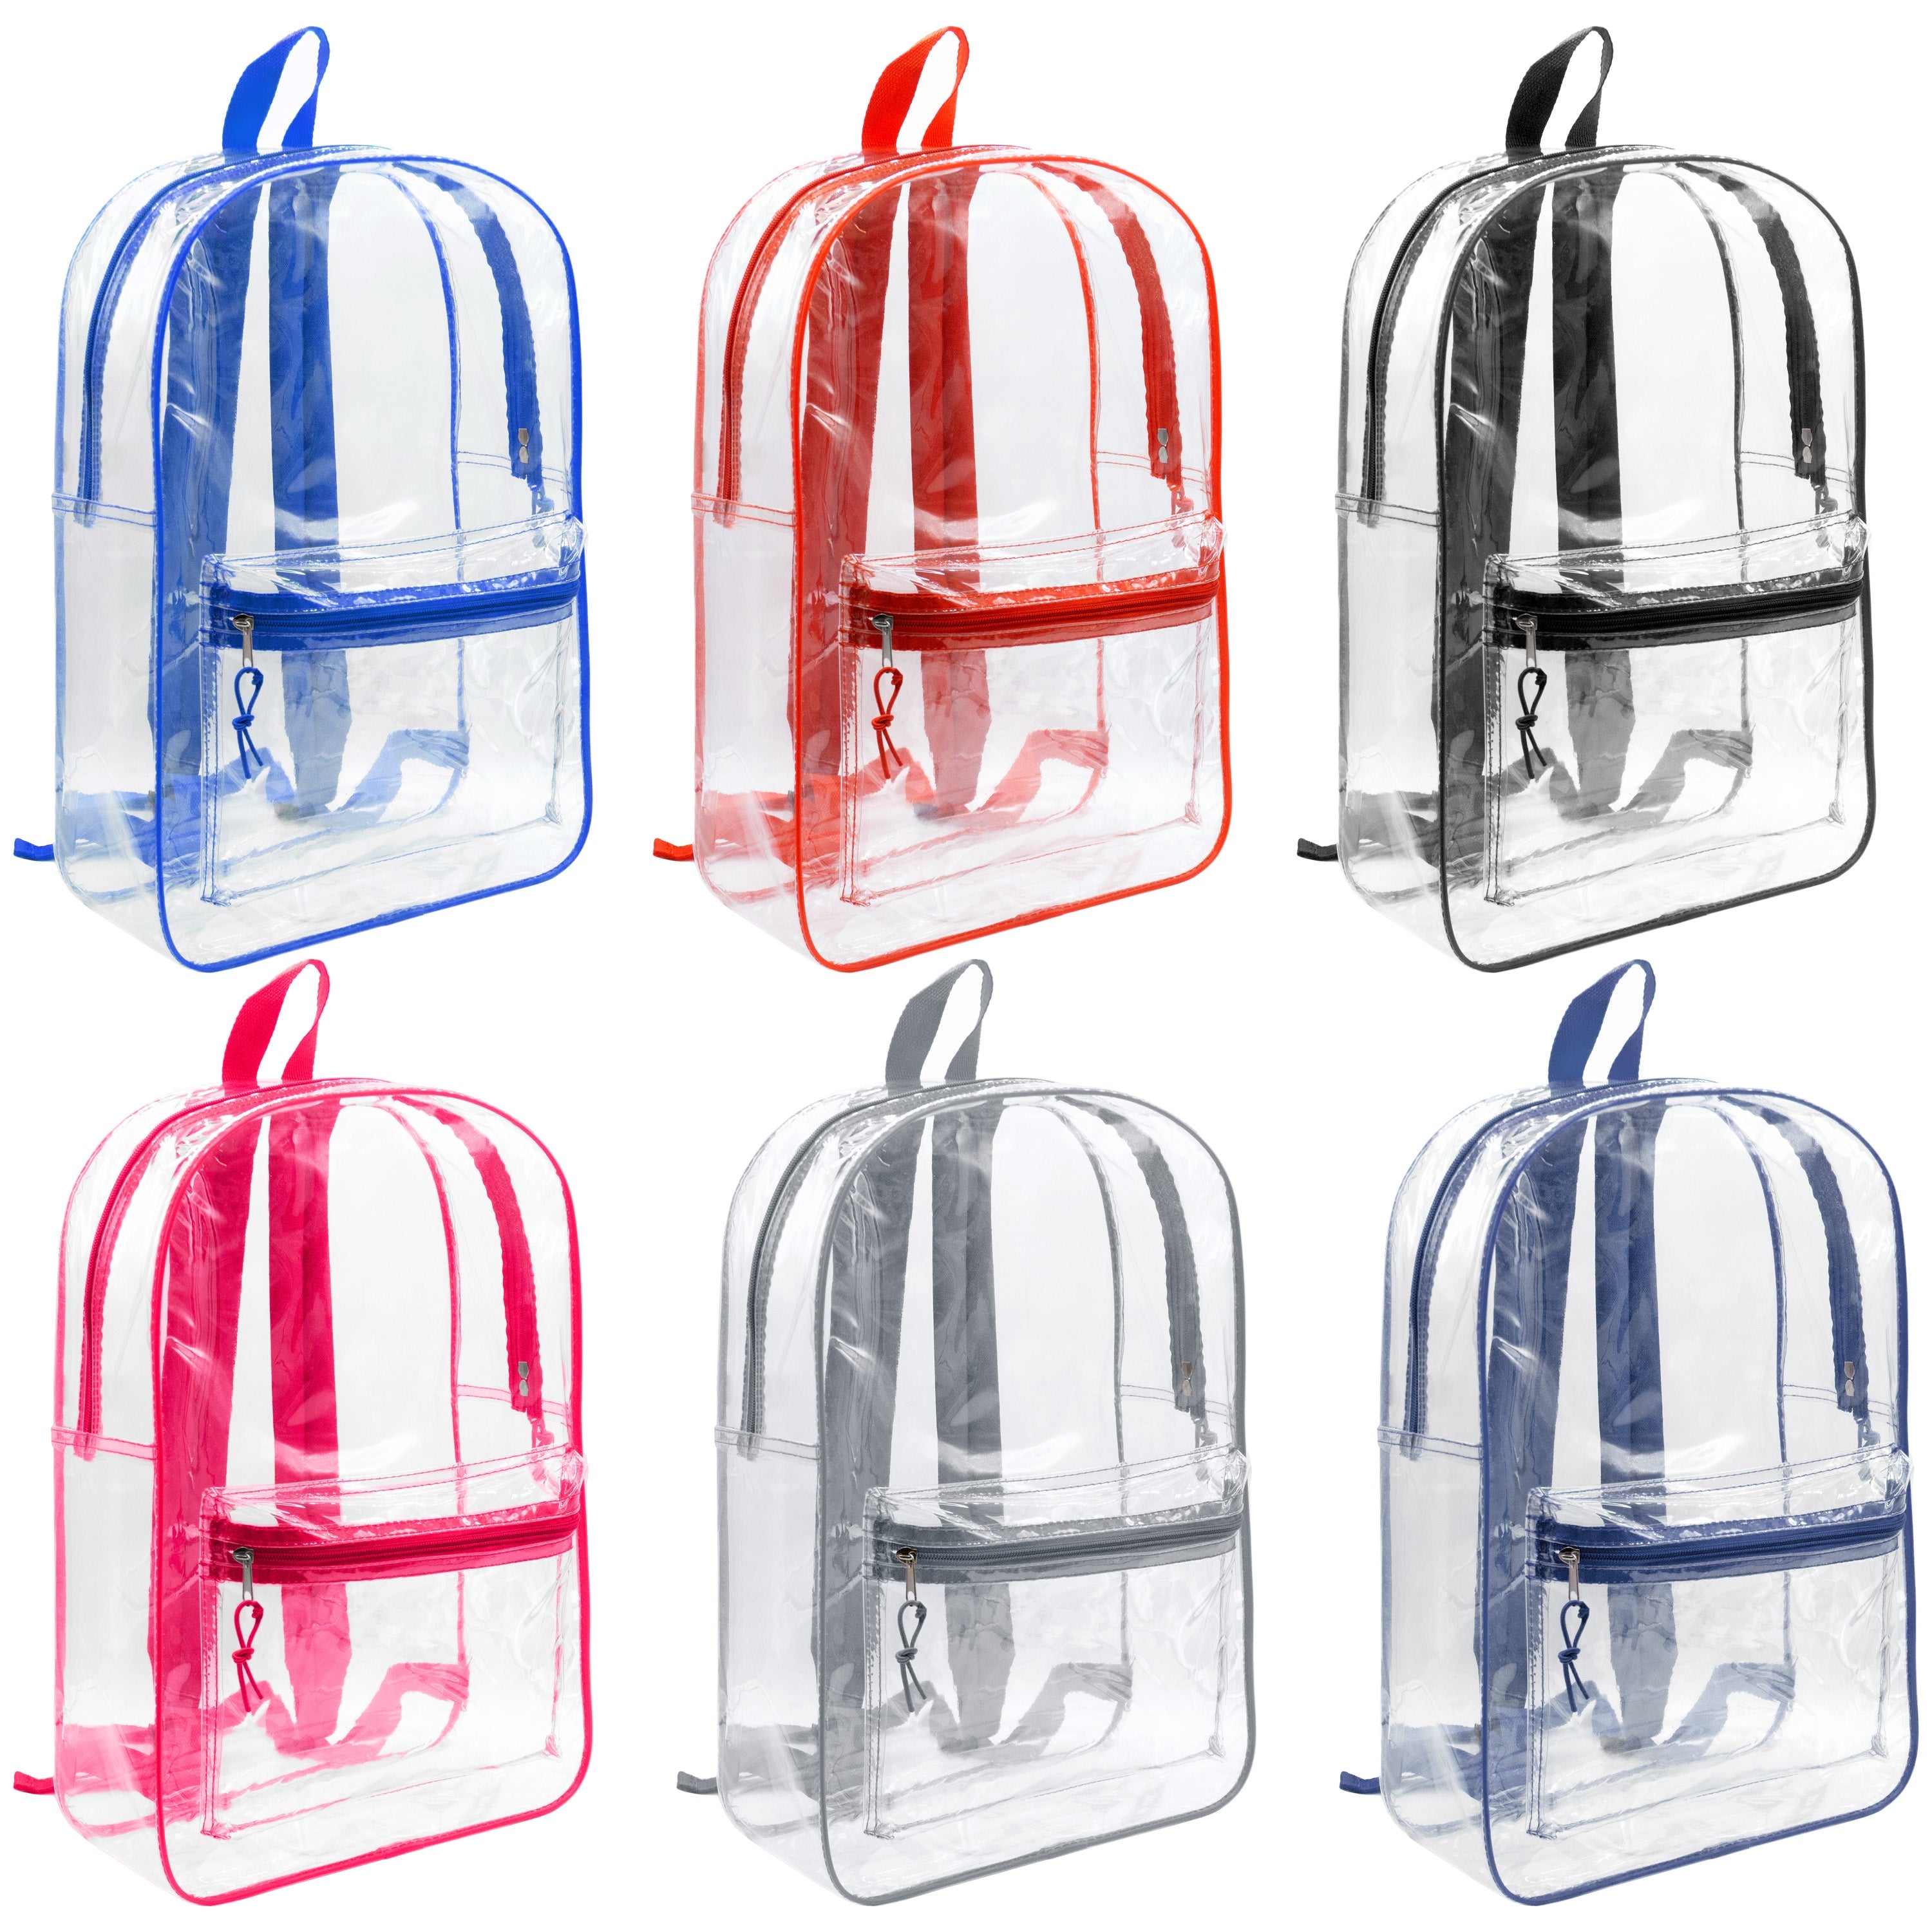 Copy of 17" Clear Vinyl Backpacks With Assorted Color Piping - Wholesale Kit of 12